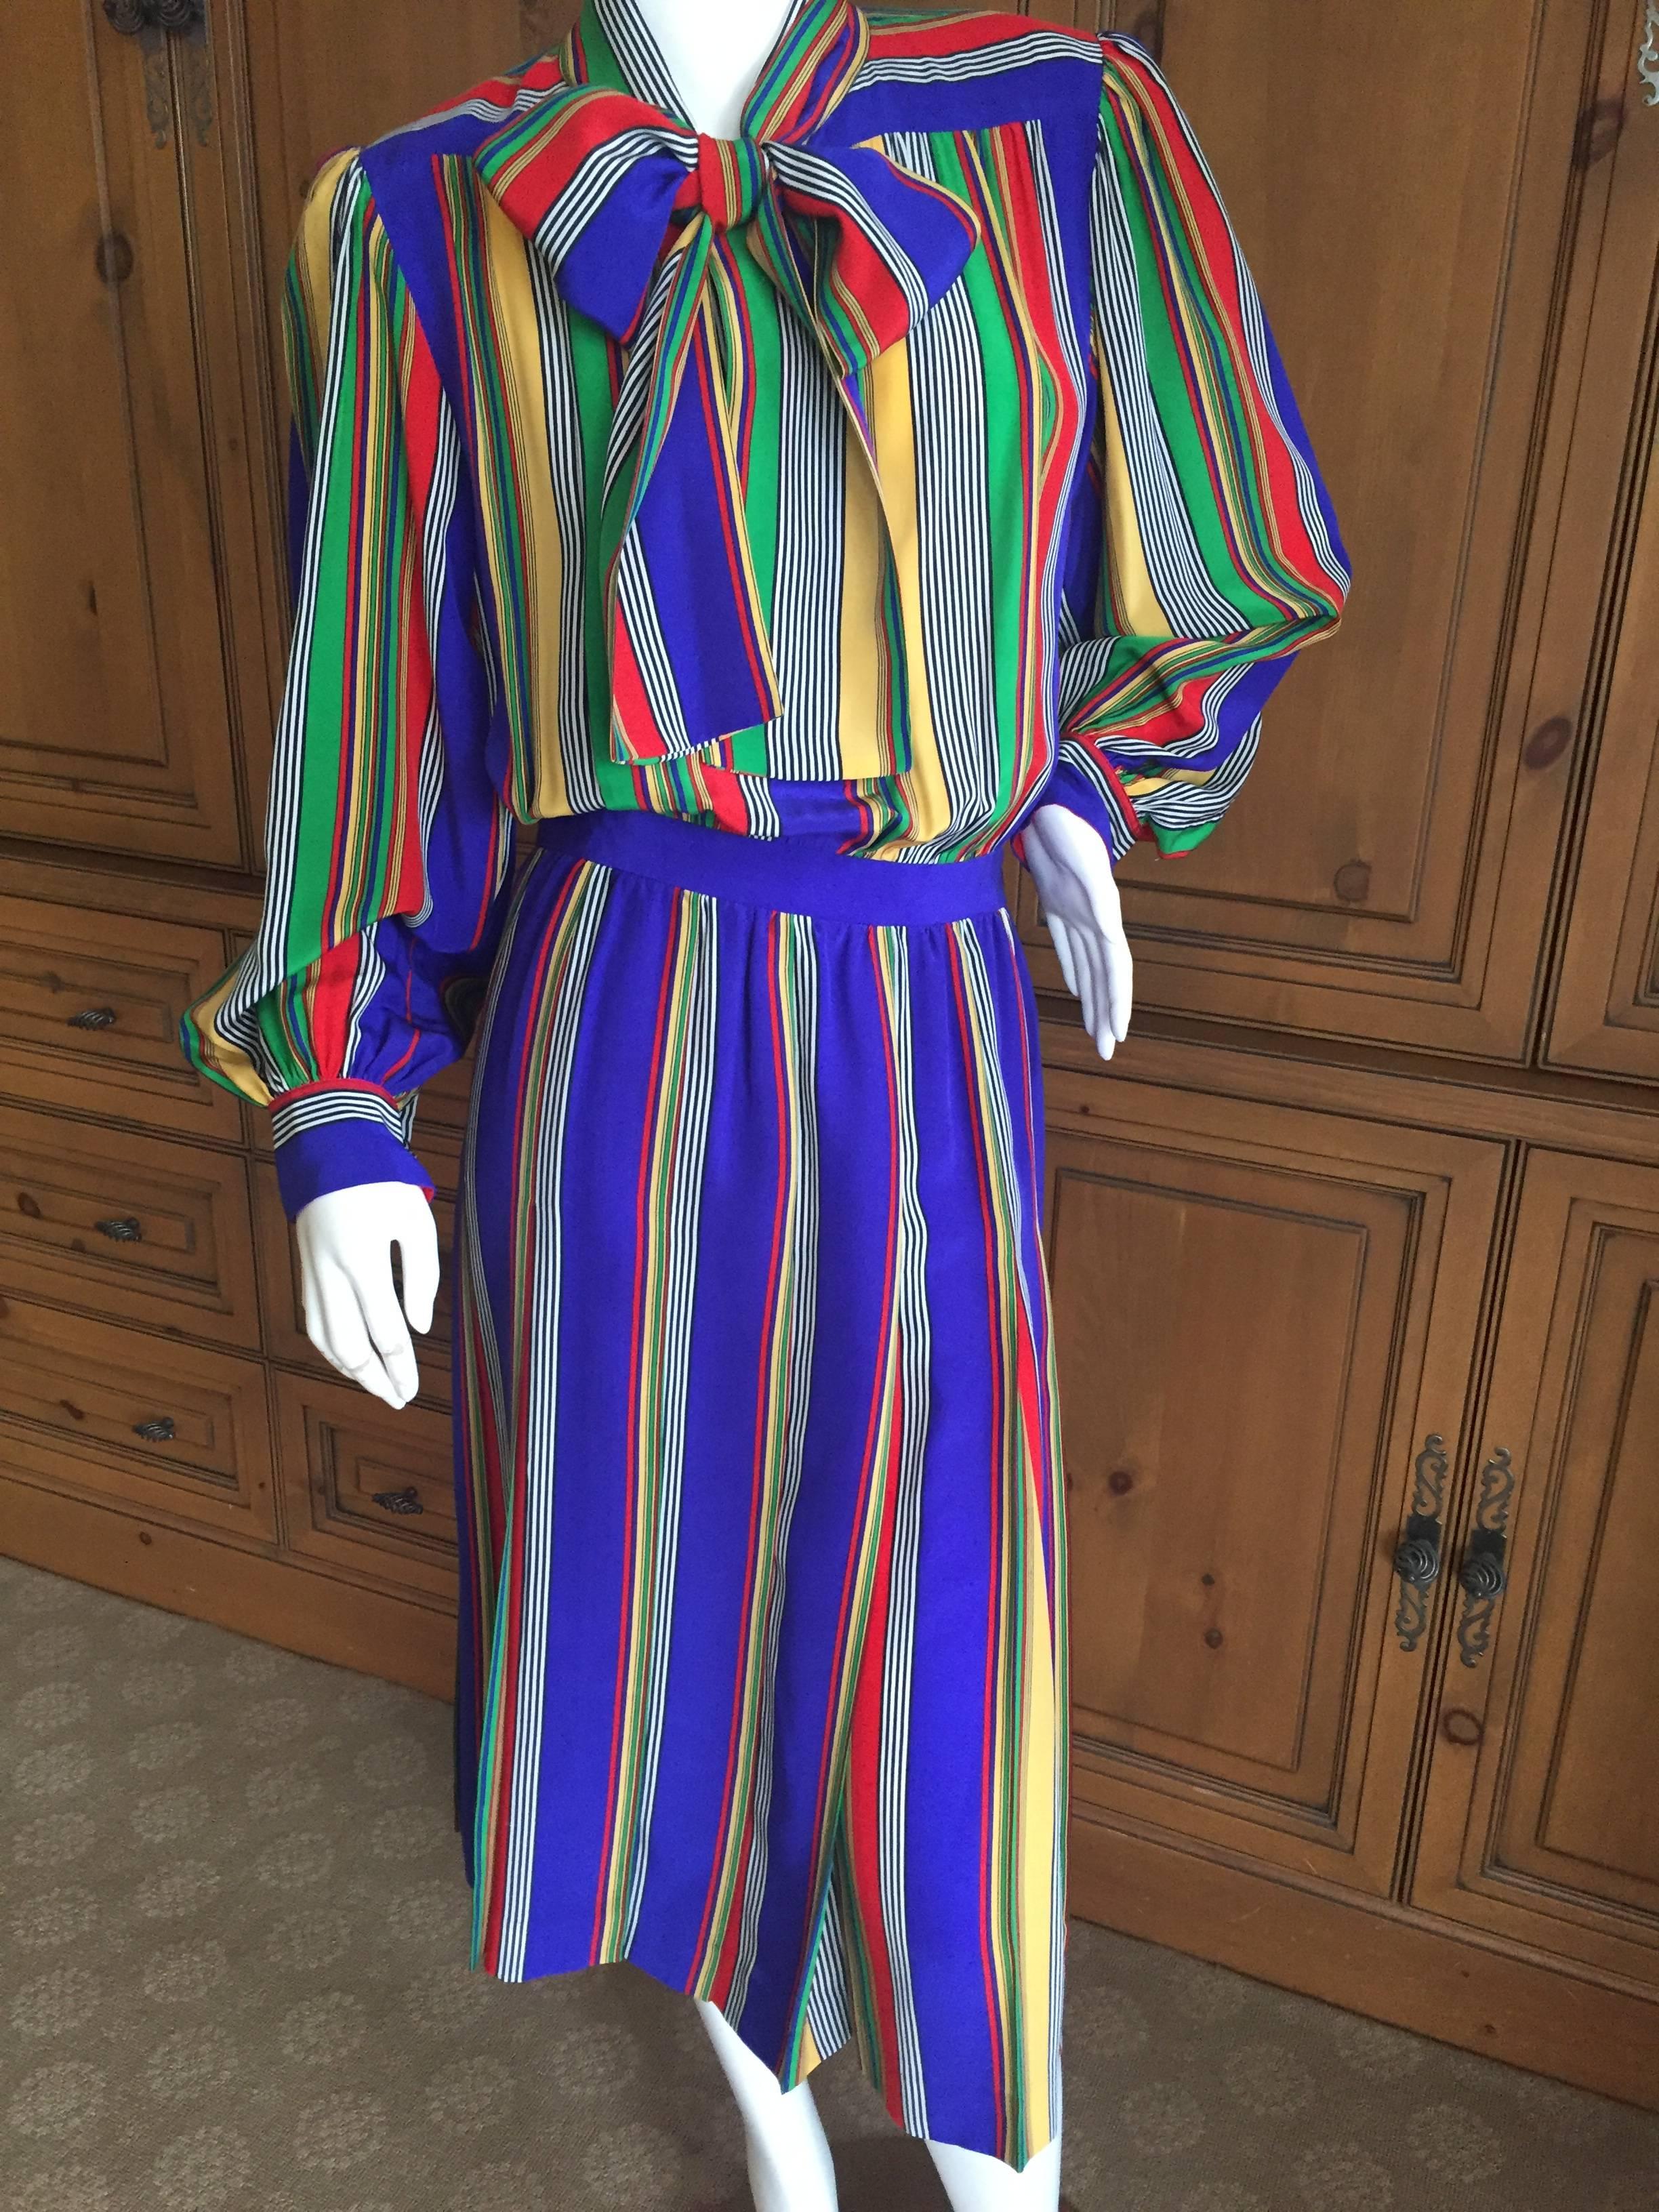 Yves Saint Laurent Rive Gauche 1970's Stripe Silk Day Dress with Bow For Sale 5